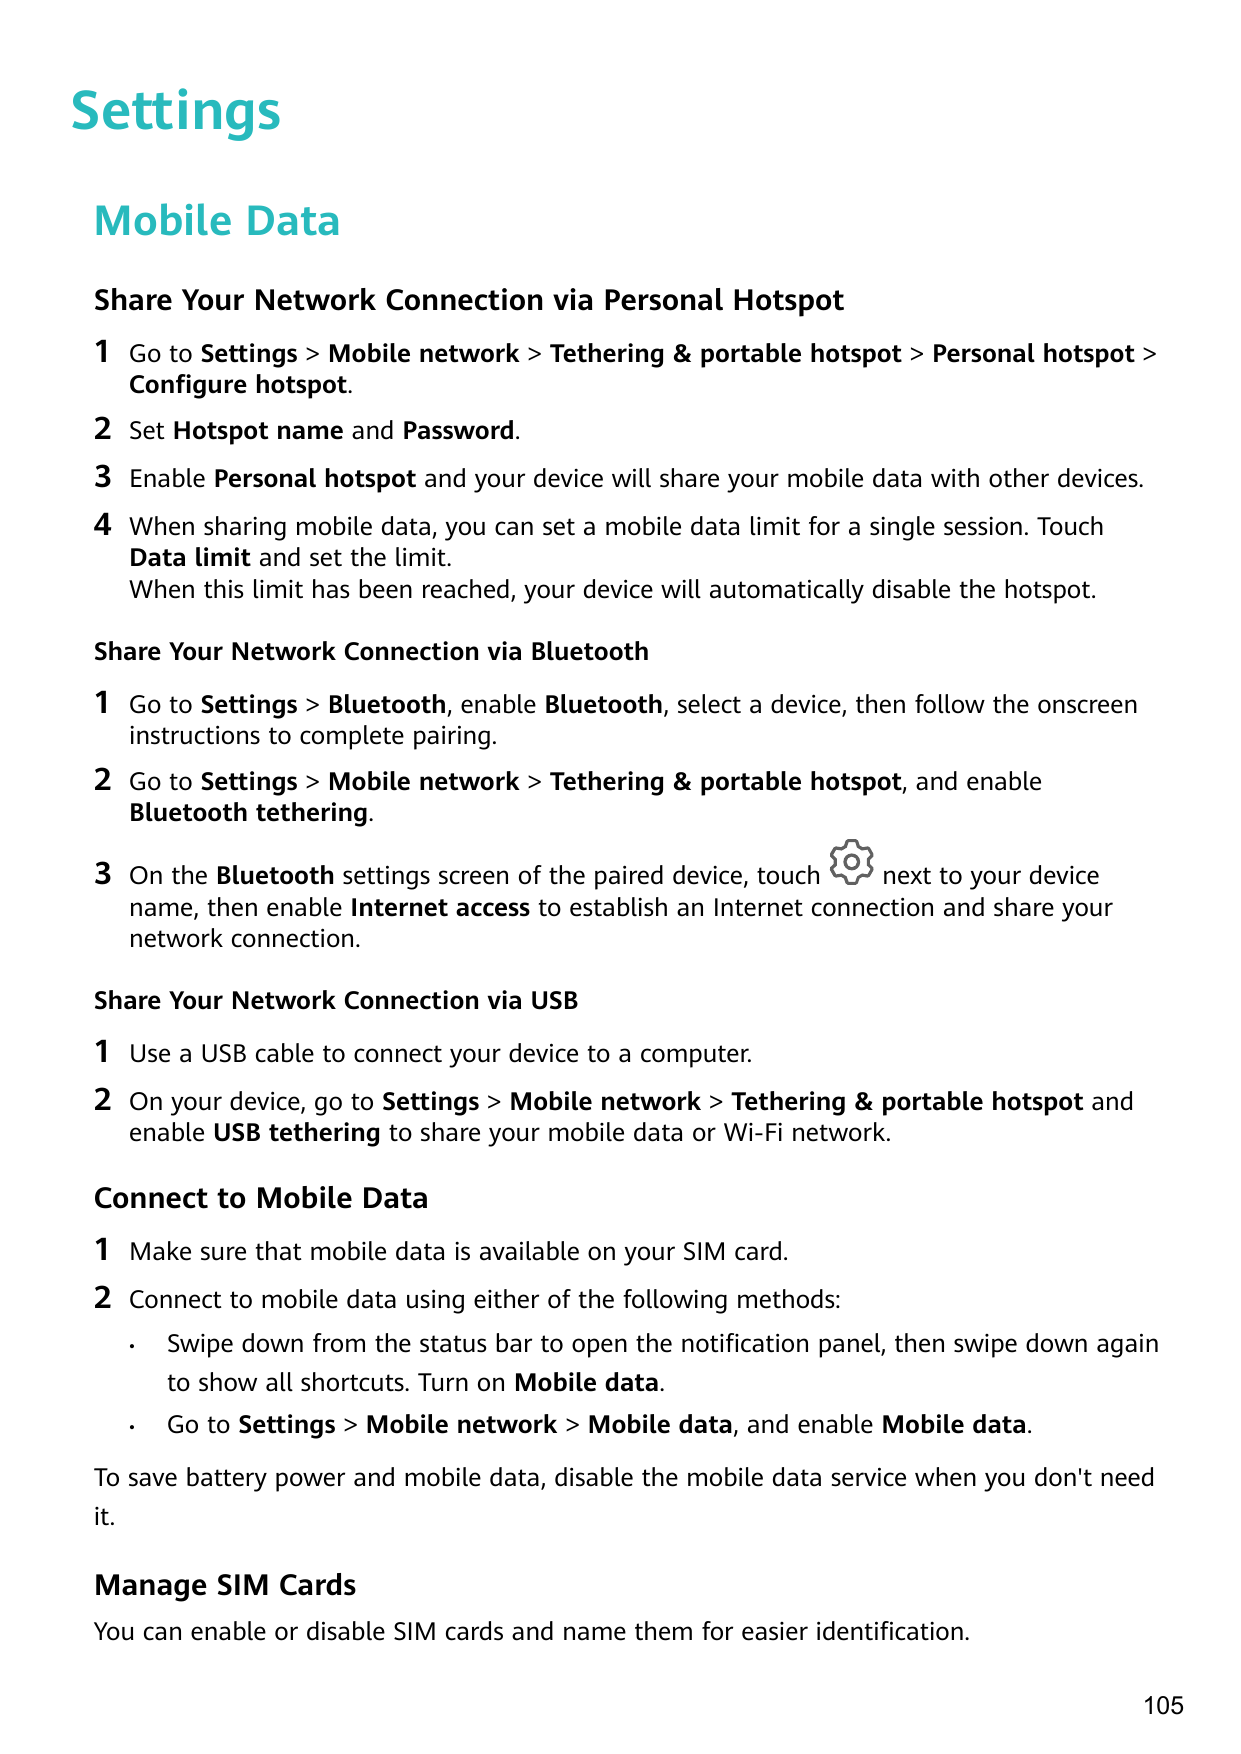 SettingsMobile DataShare Your Network Connection via Personal Hotspot1Go to Settings > Mobile network > Tethering & portable hot